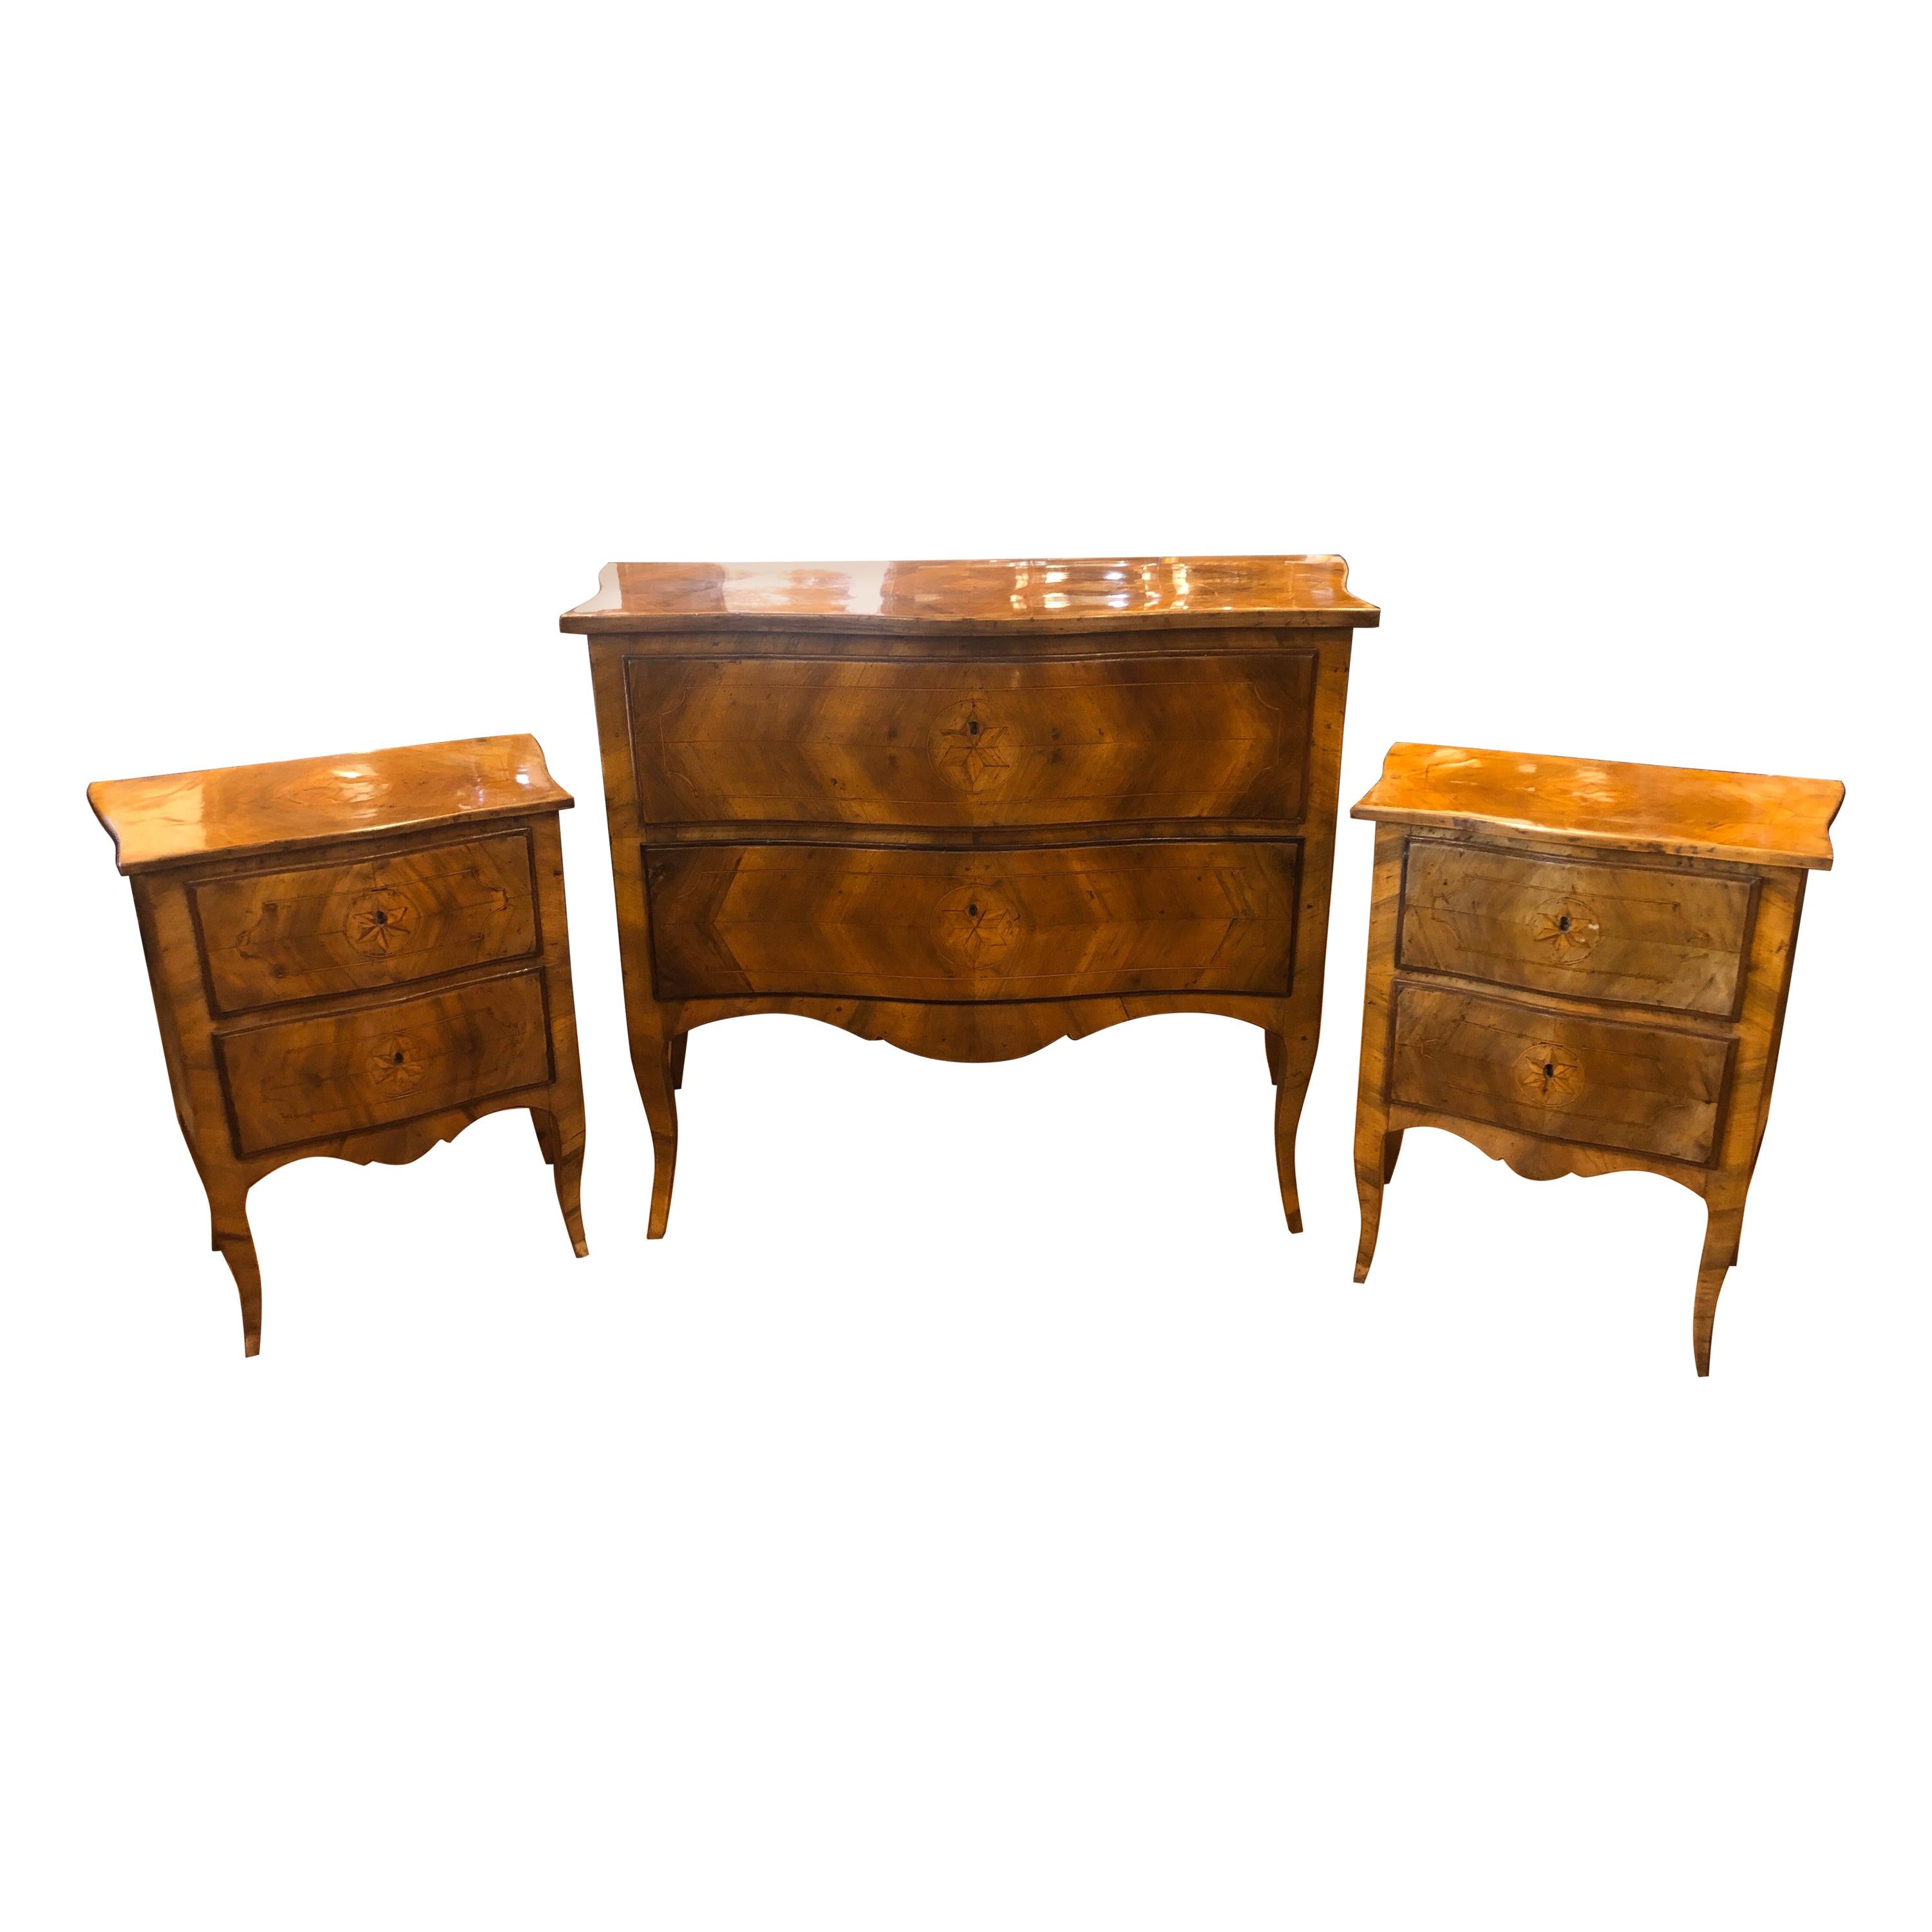 20th Century Wood Louis XVI Revival Chest of Drawers and Nightstands, Italy 1910